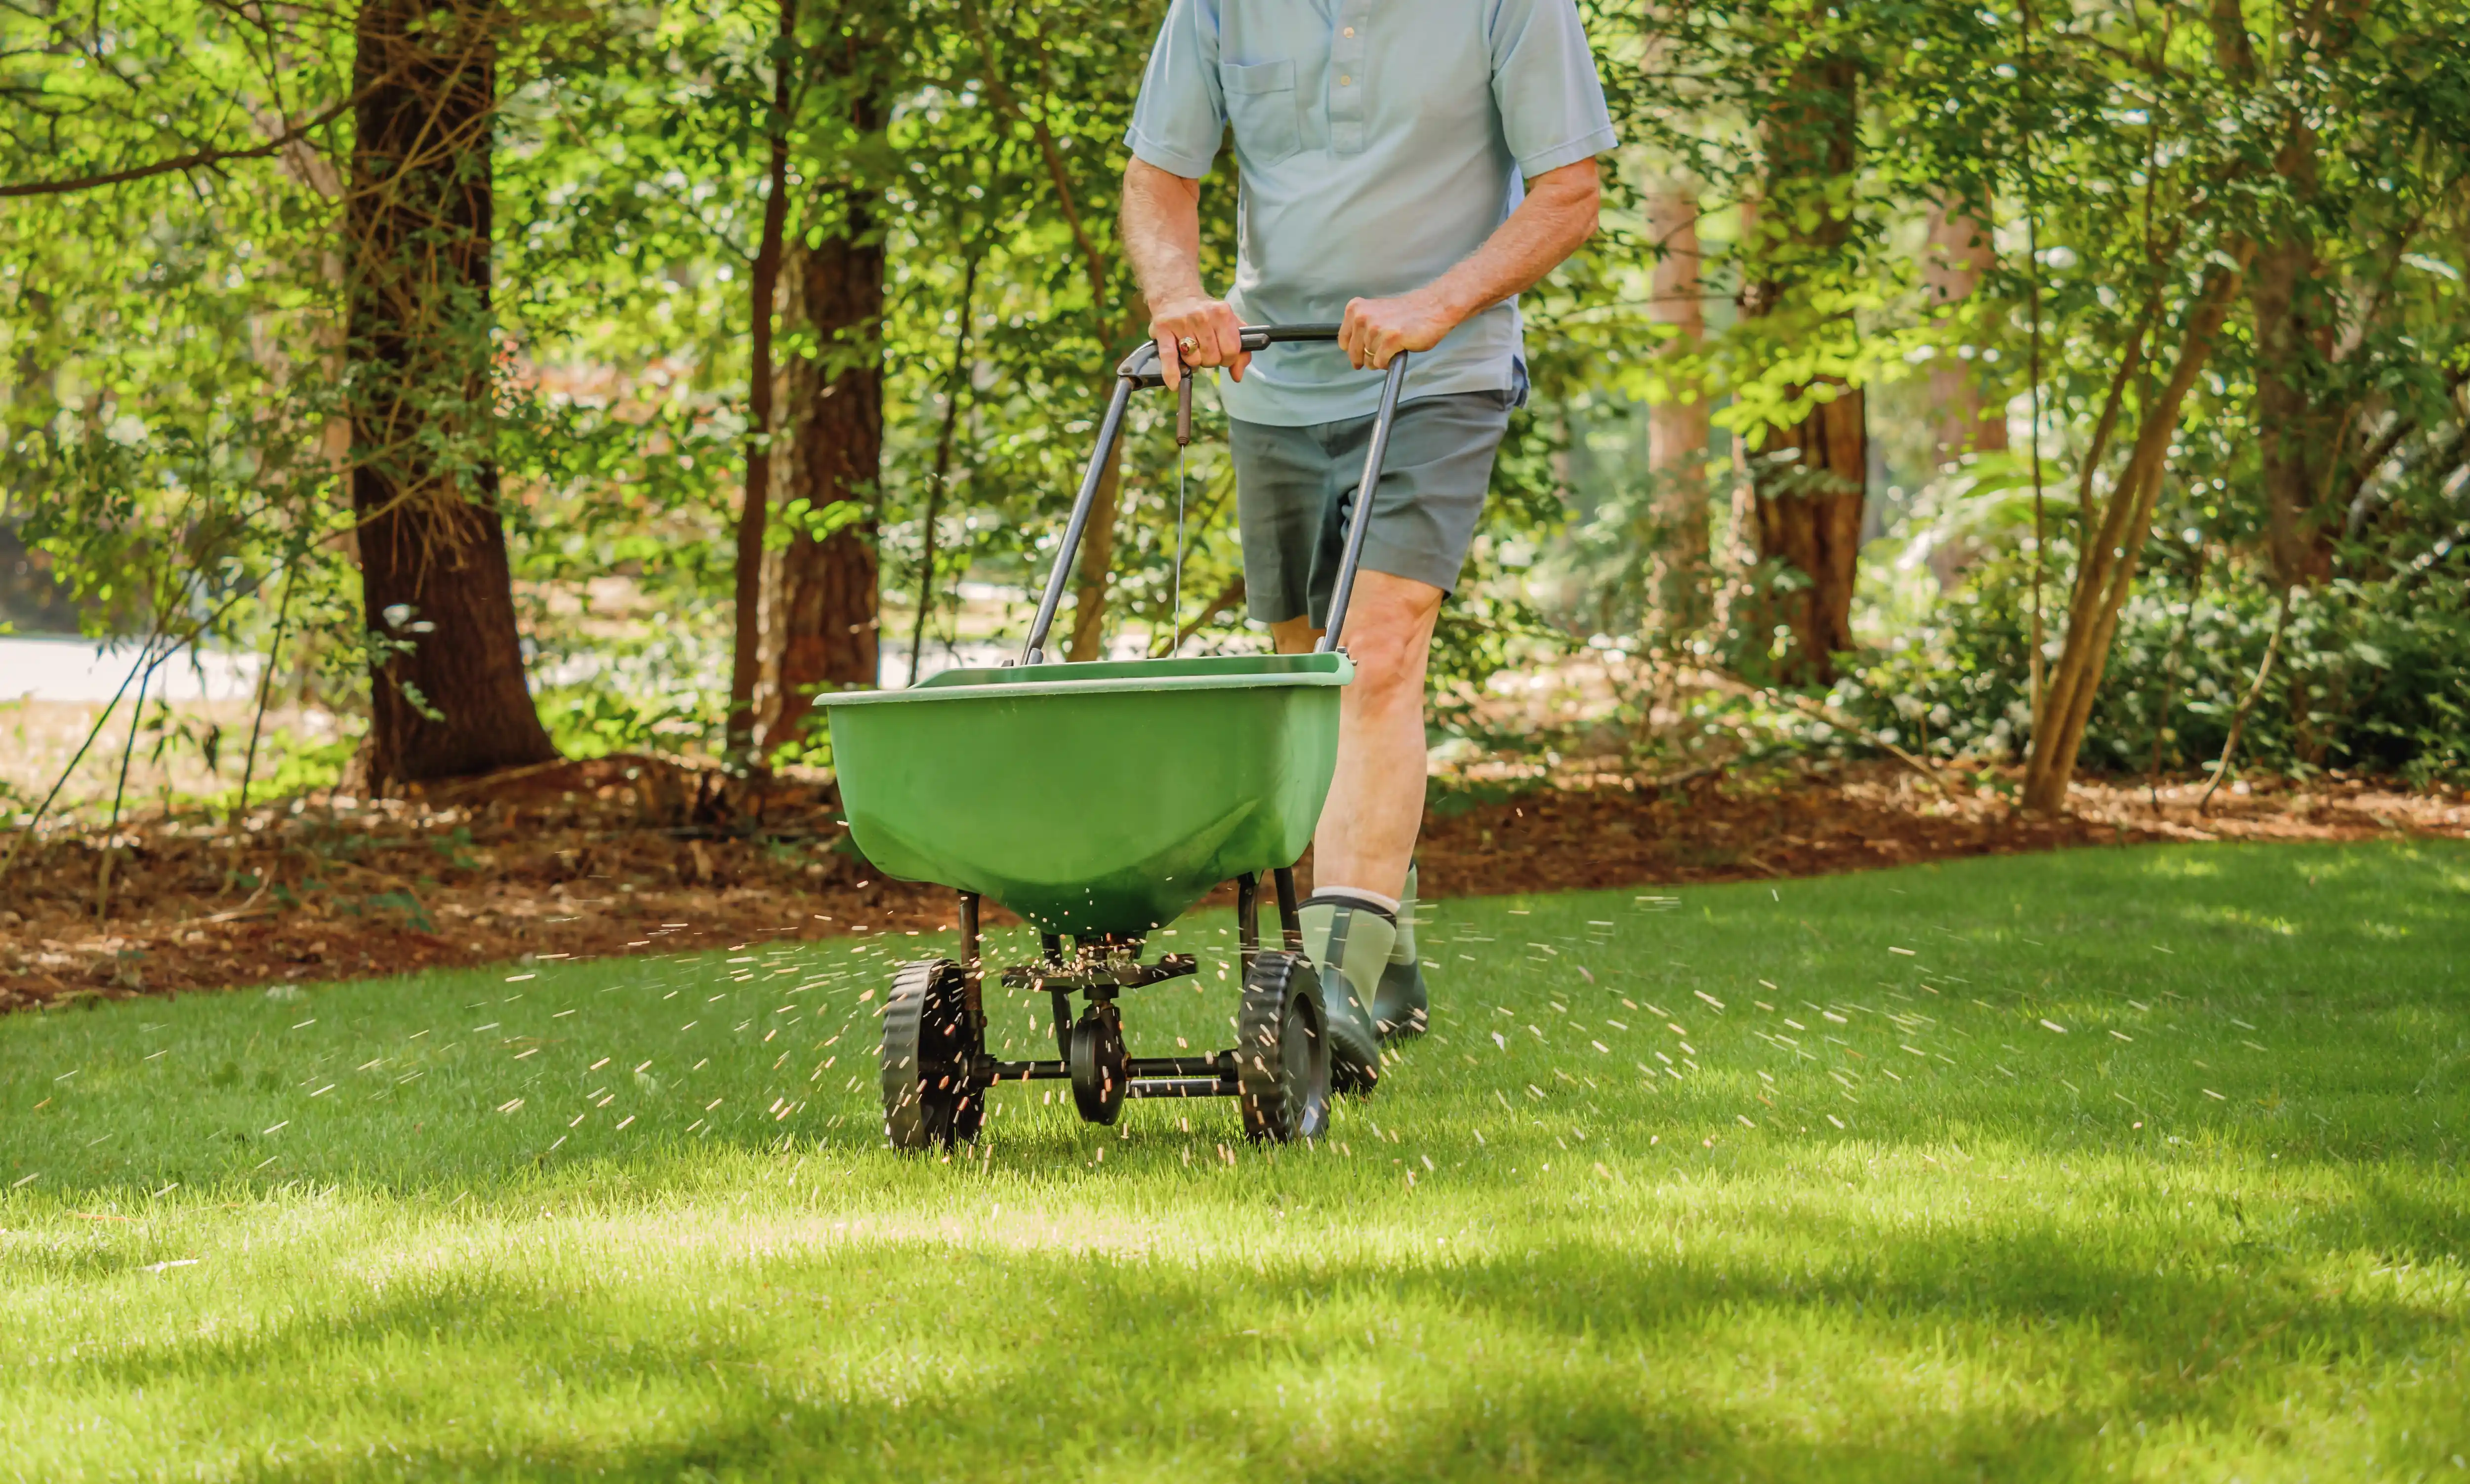 Lawn Fertilization Costs: How Much Should You Expect to Spend?